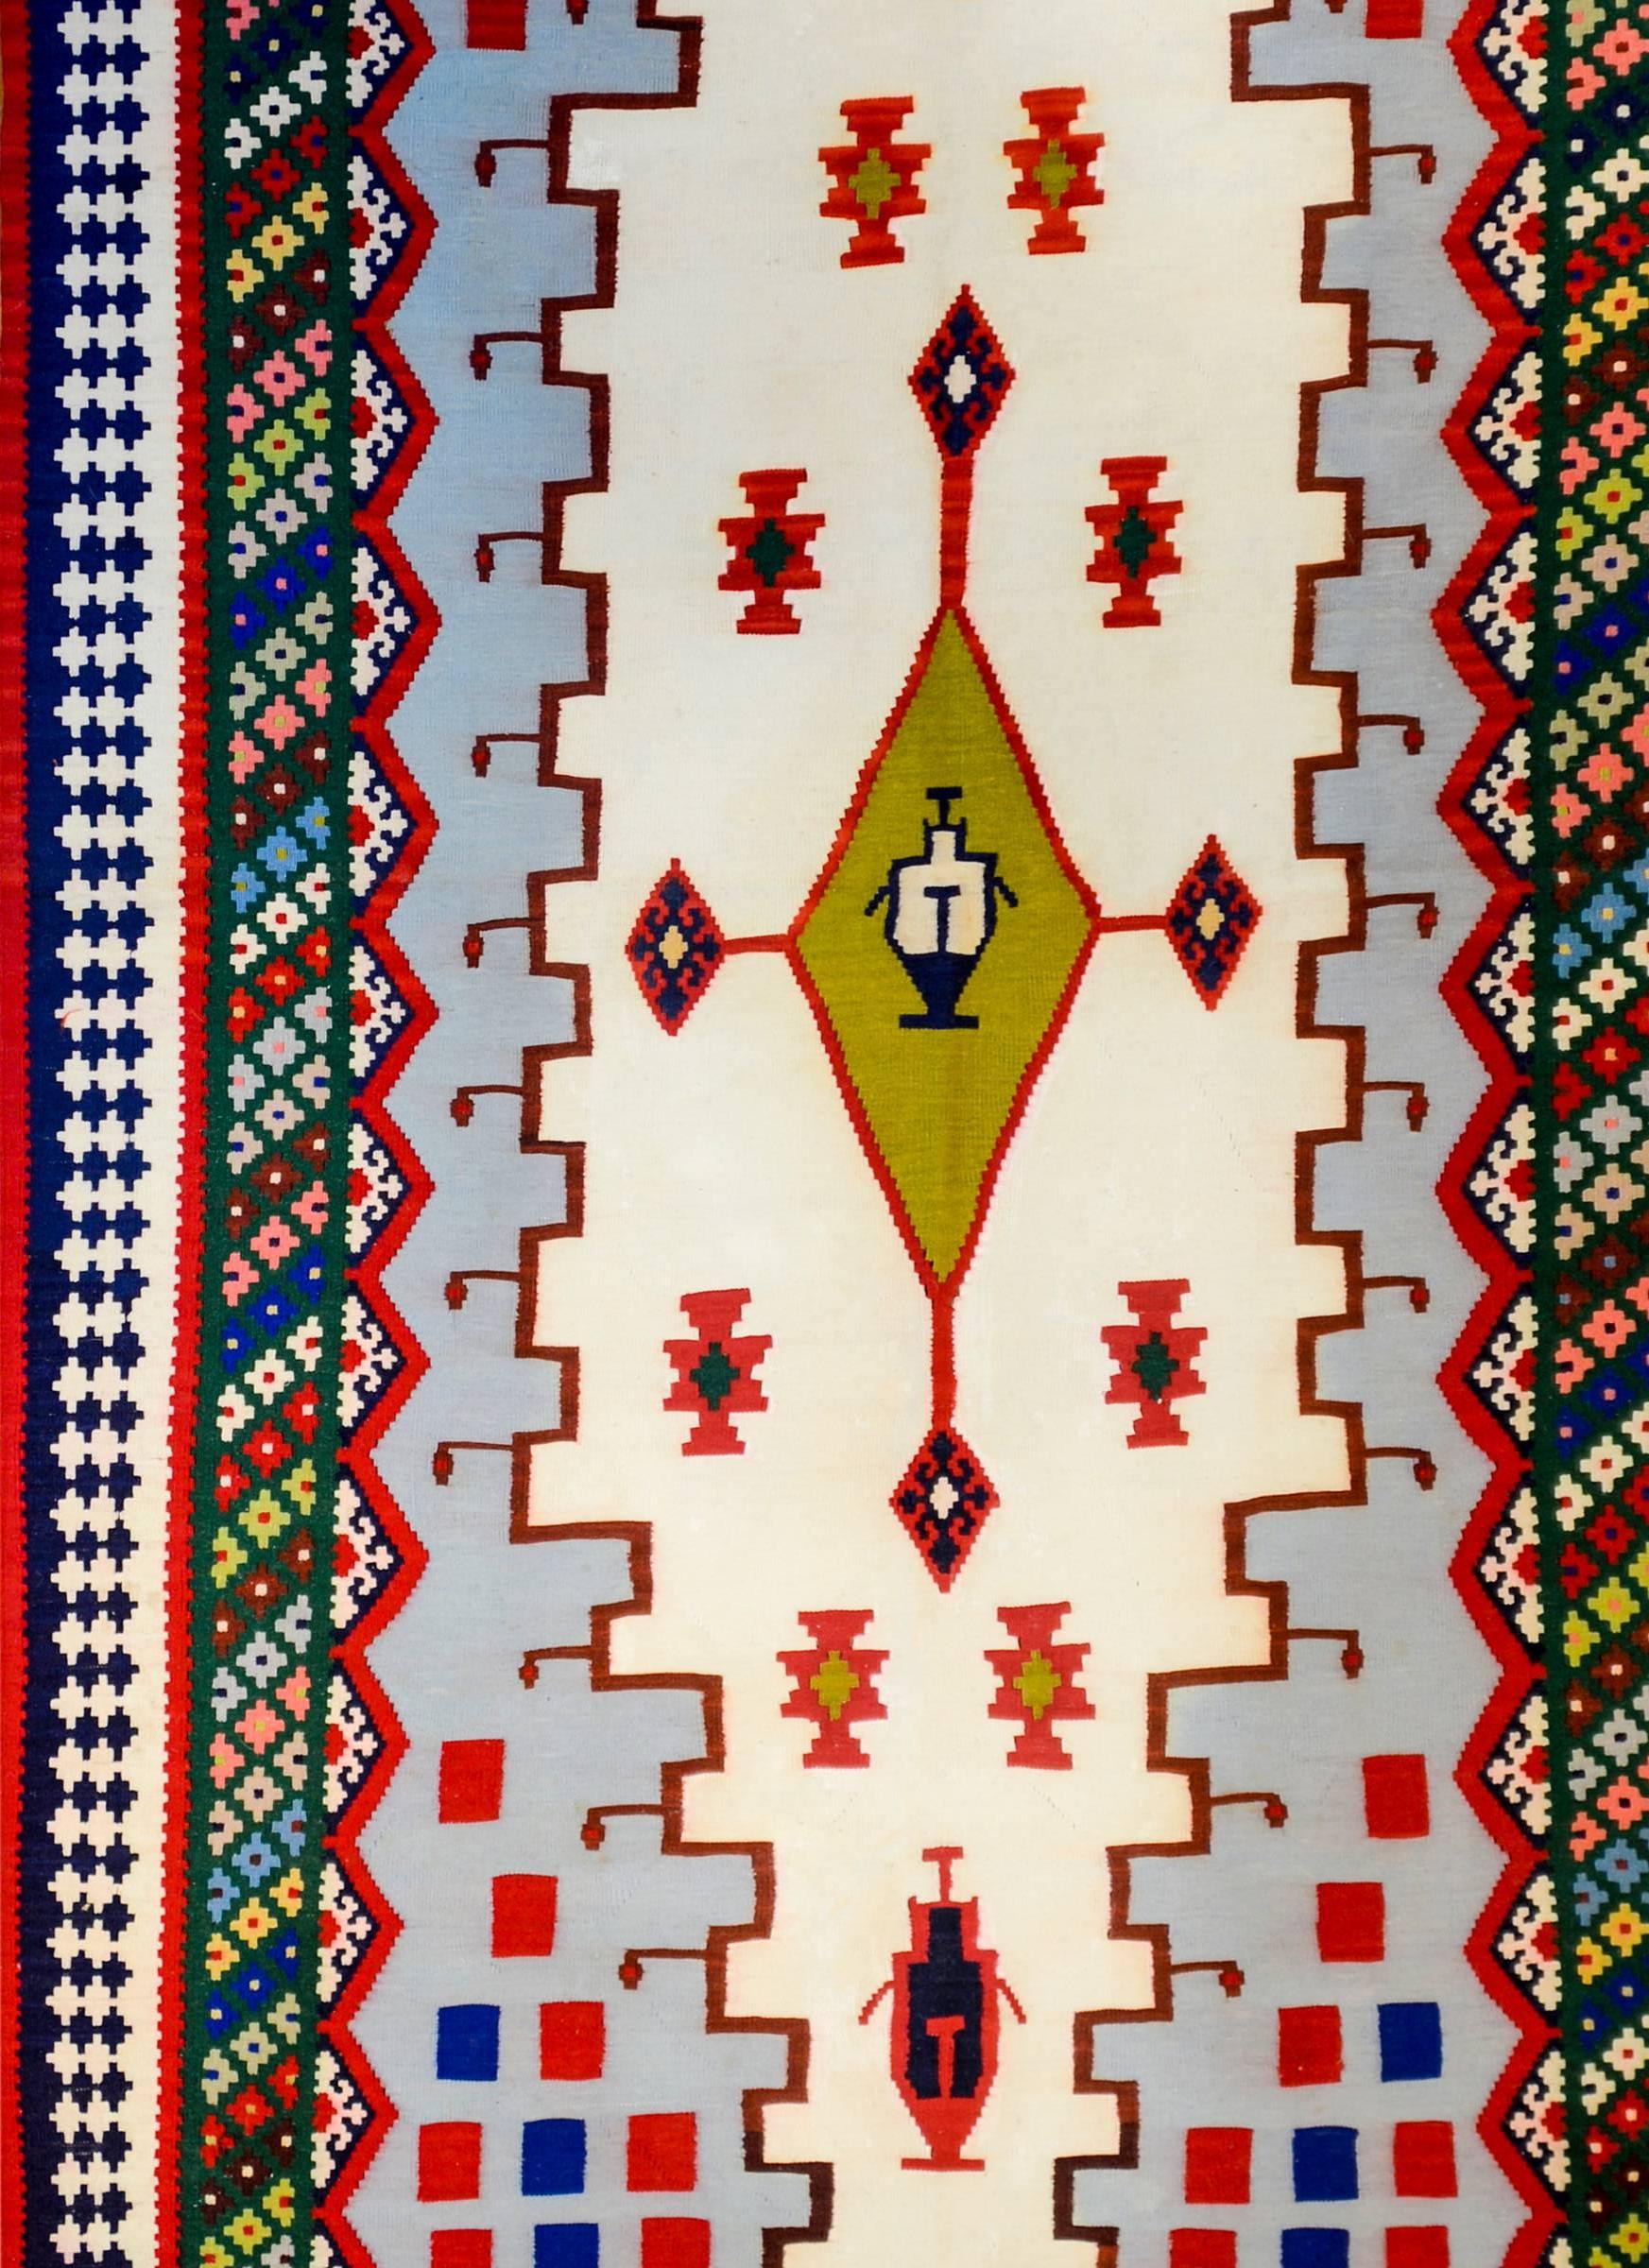 A beautiful early 20th century Persian Shiraz Kilim rug with a fantastic central chartreuse diamond medallion midst a field of stylized flowers on a cream colored background. The border is complex with multiple multicolored geometric patterned